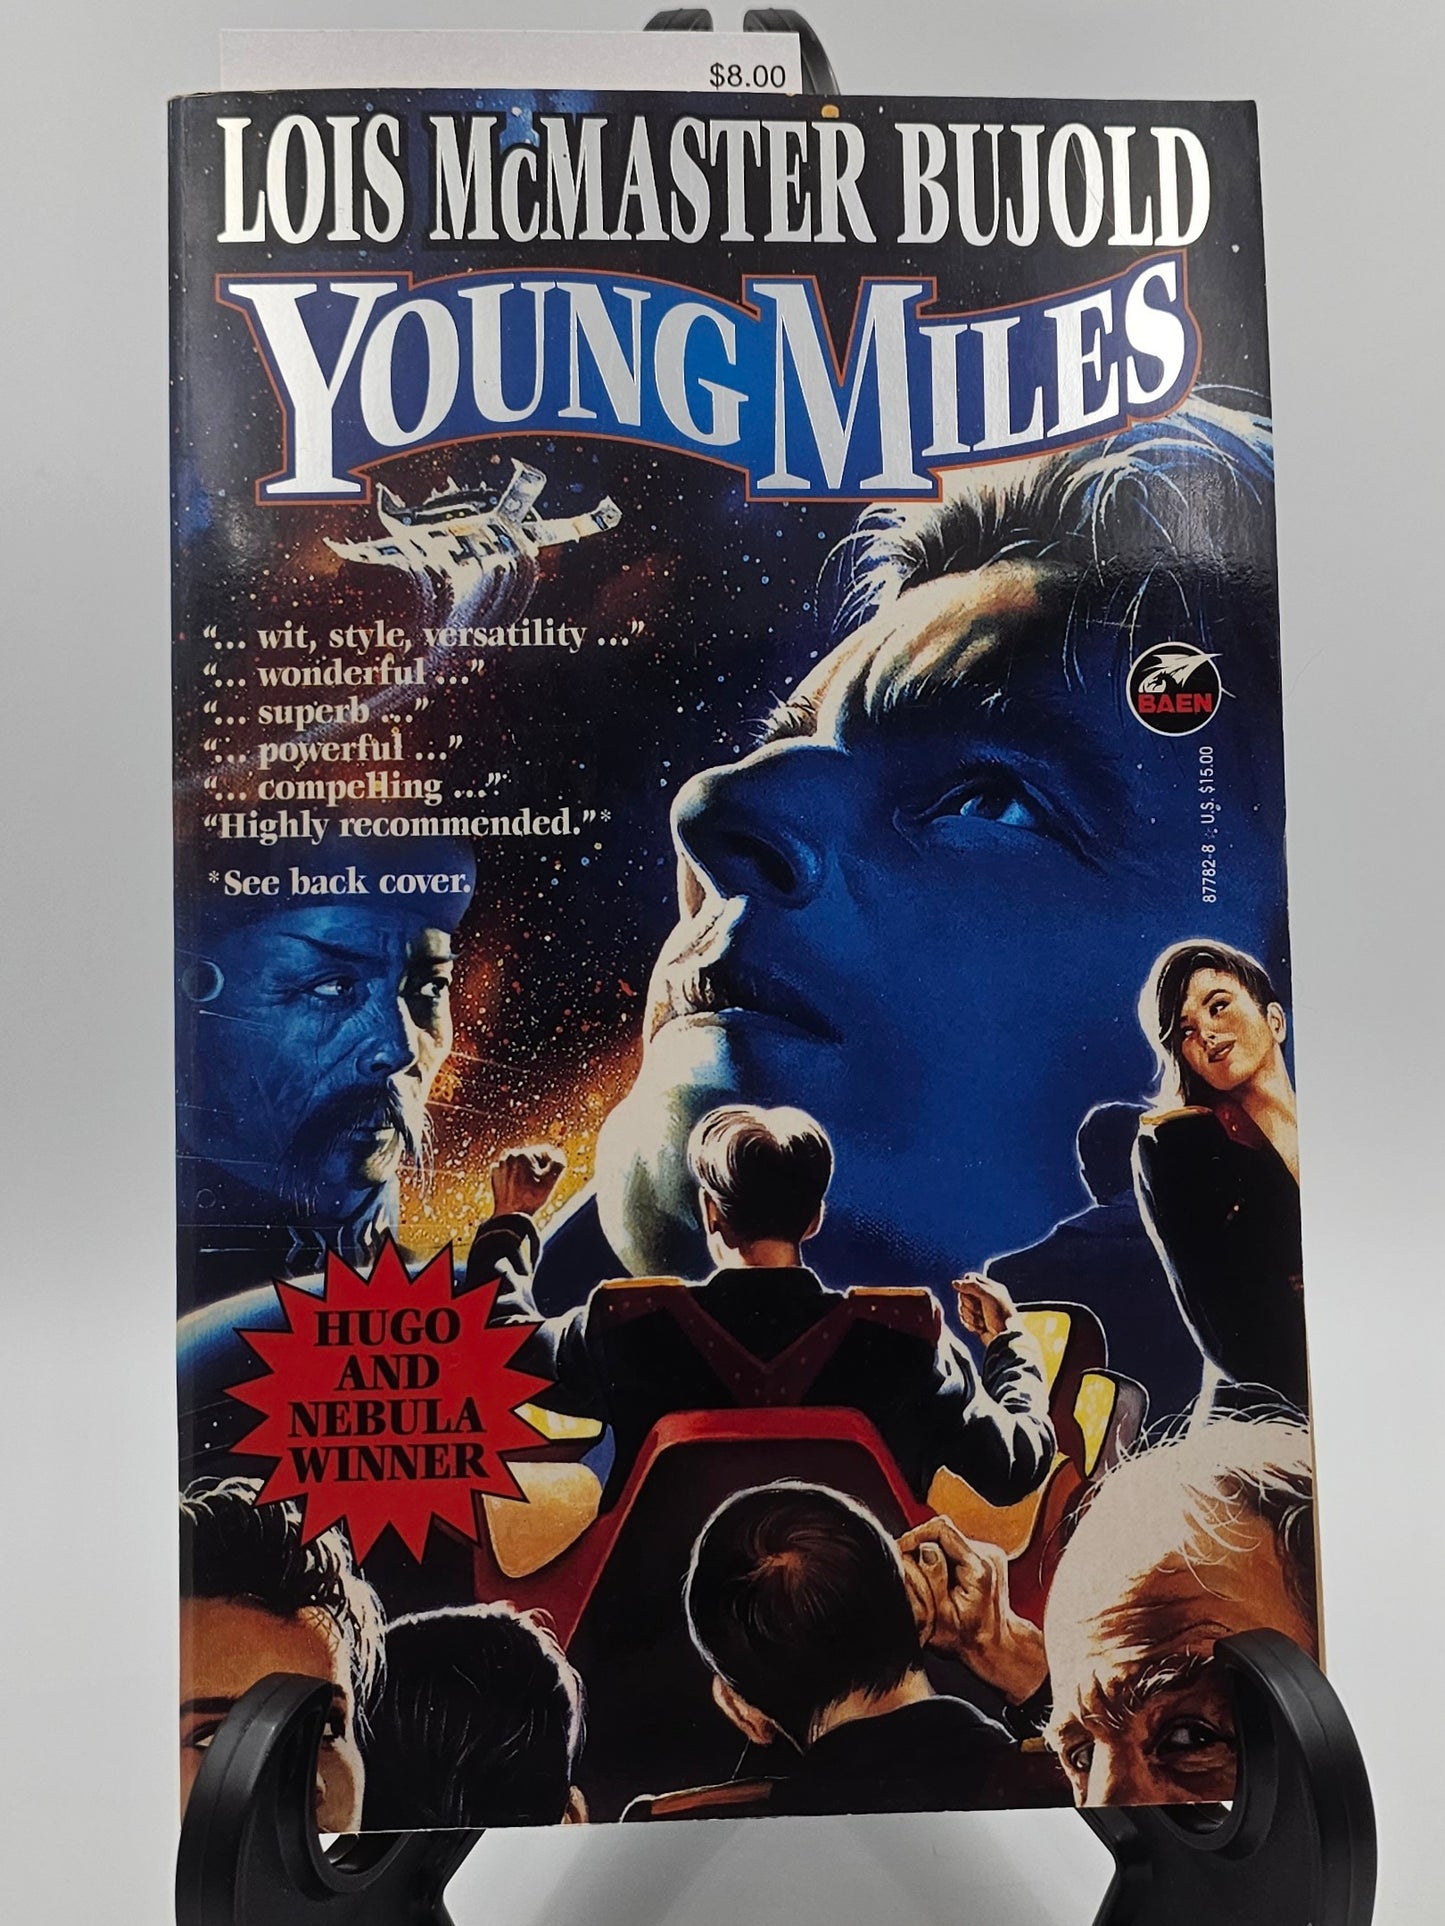 Young Miles By: Lois McMaster Bujold (Vorkosigan Saga (Chronological) #2, 5.1, & 6)